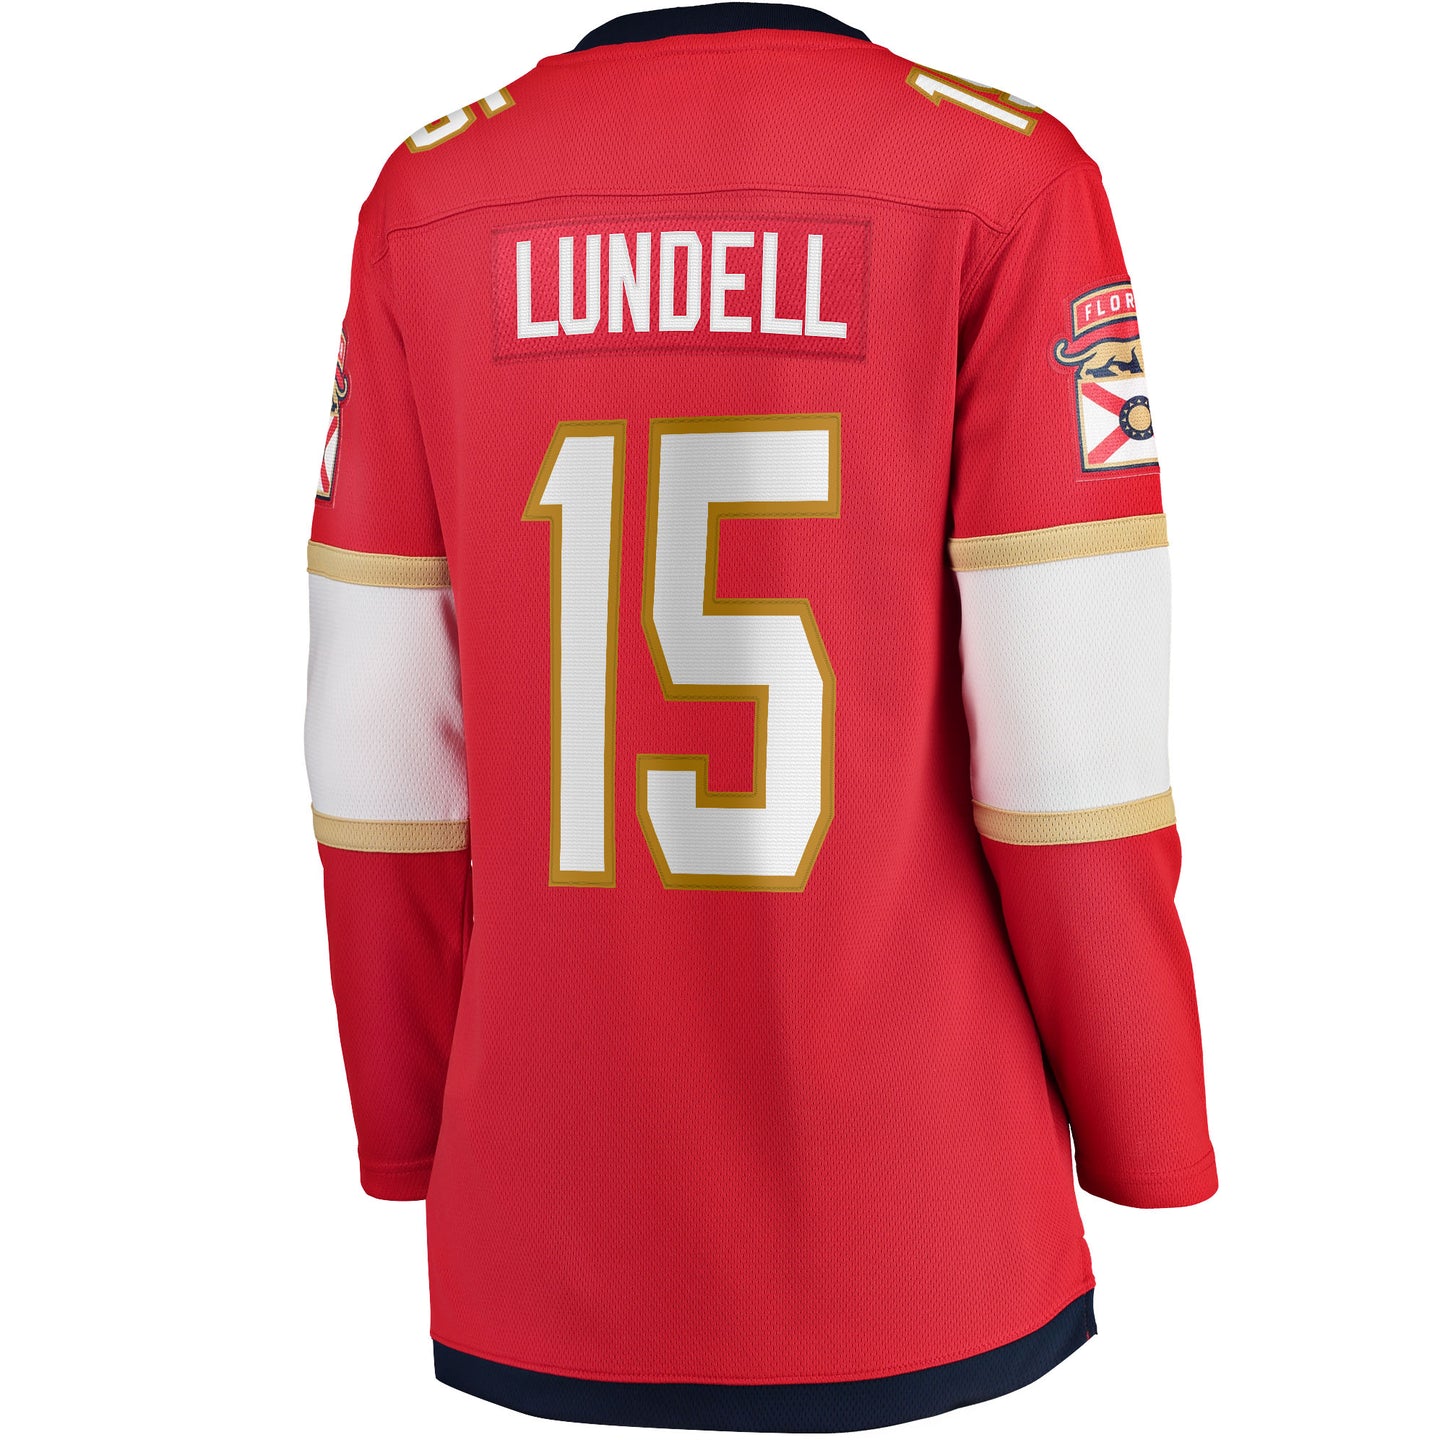 Anton Lundell Florida Panthers Fanatics Branded Women's Home Breakaway Player Jersey - Red